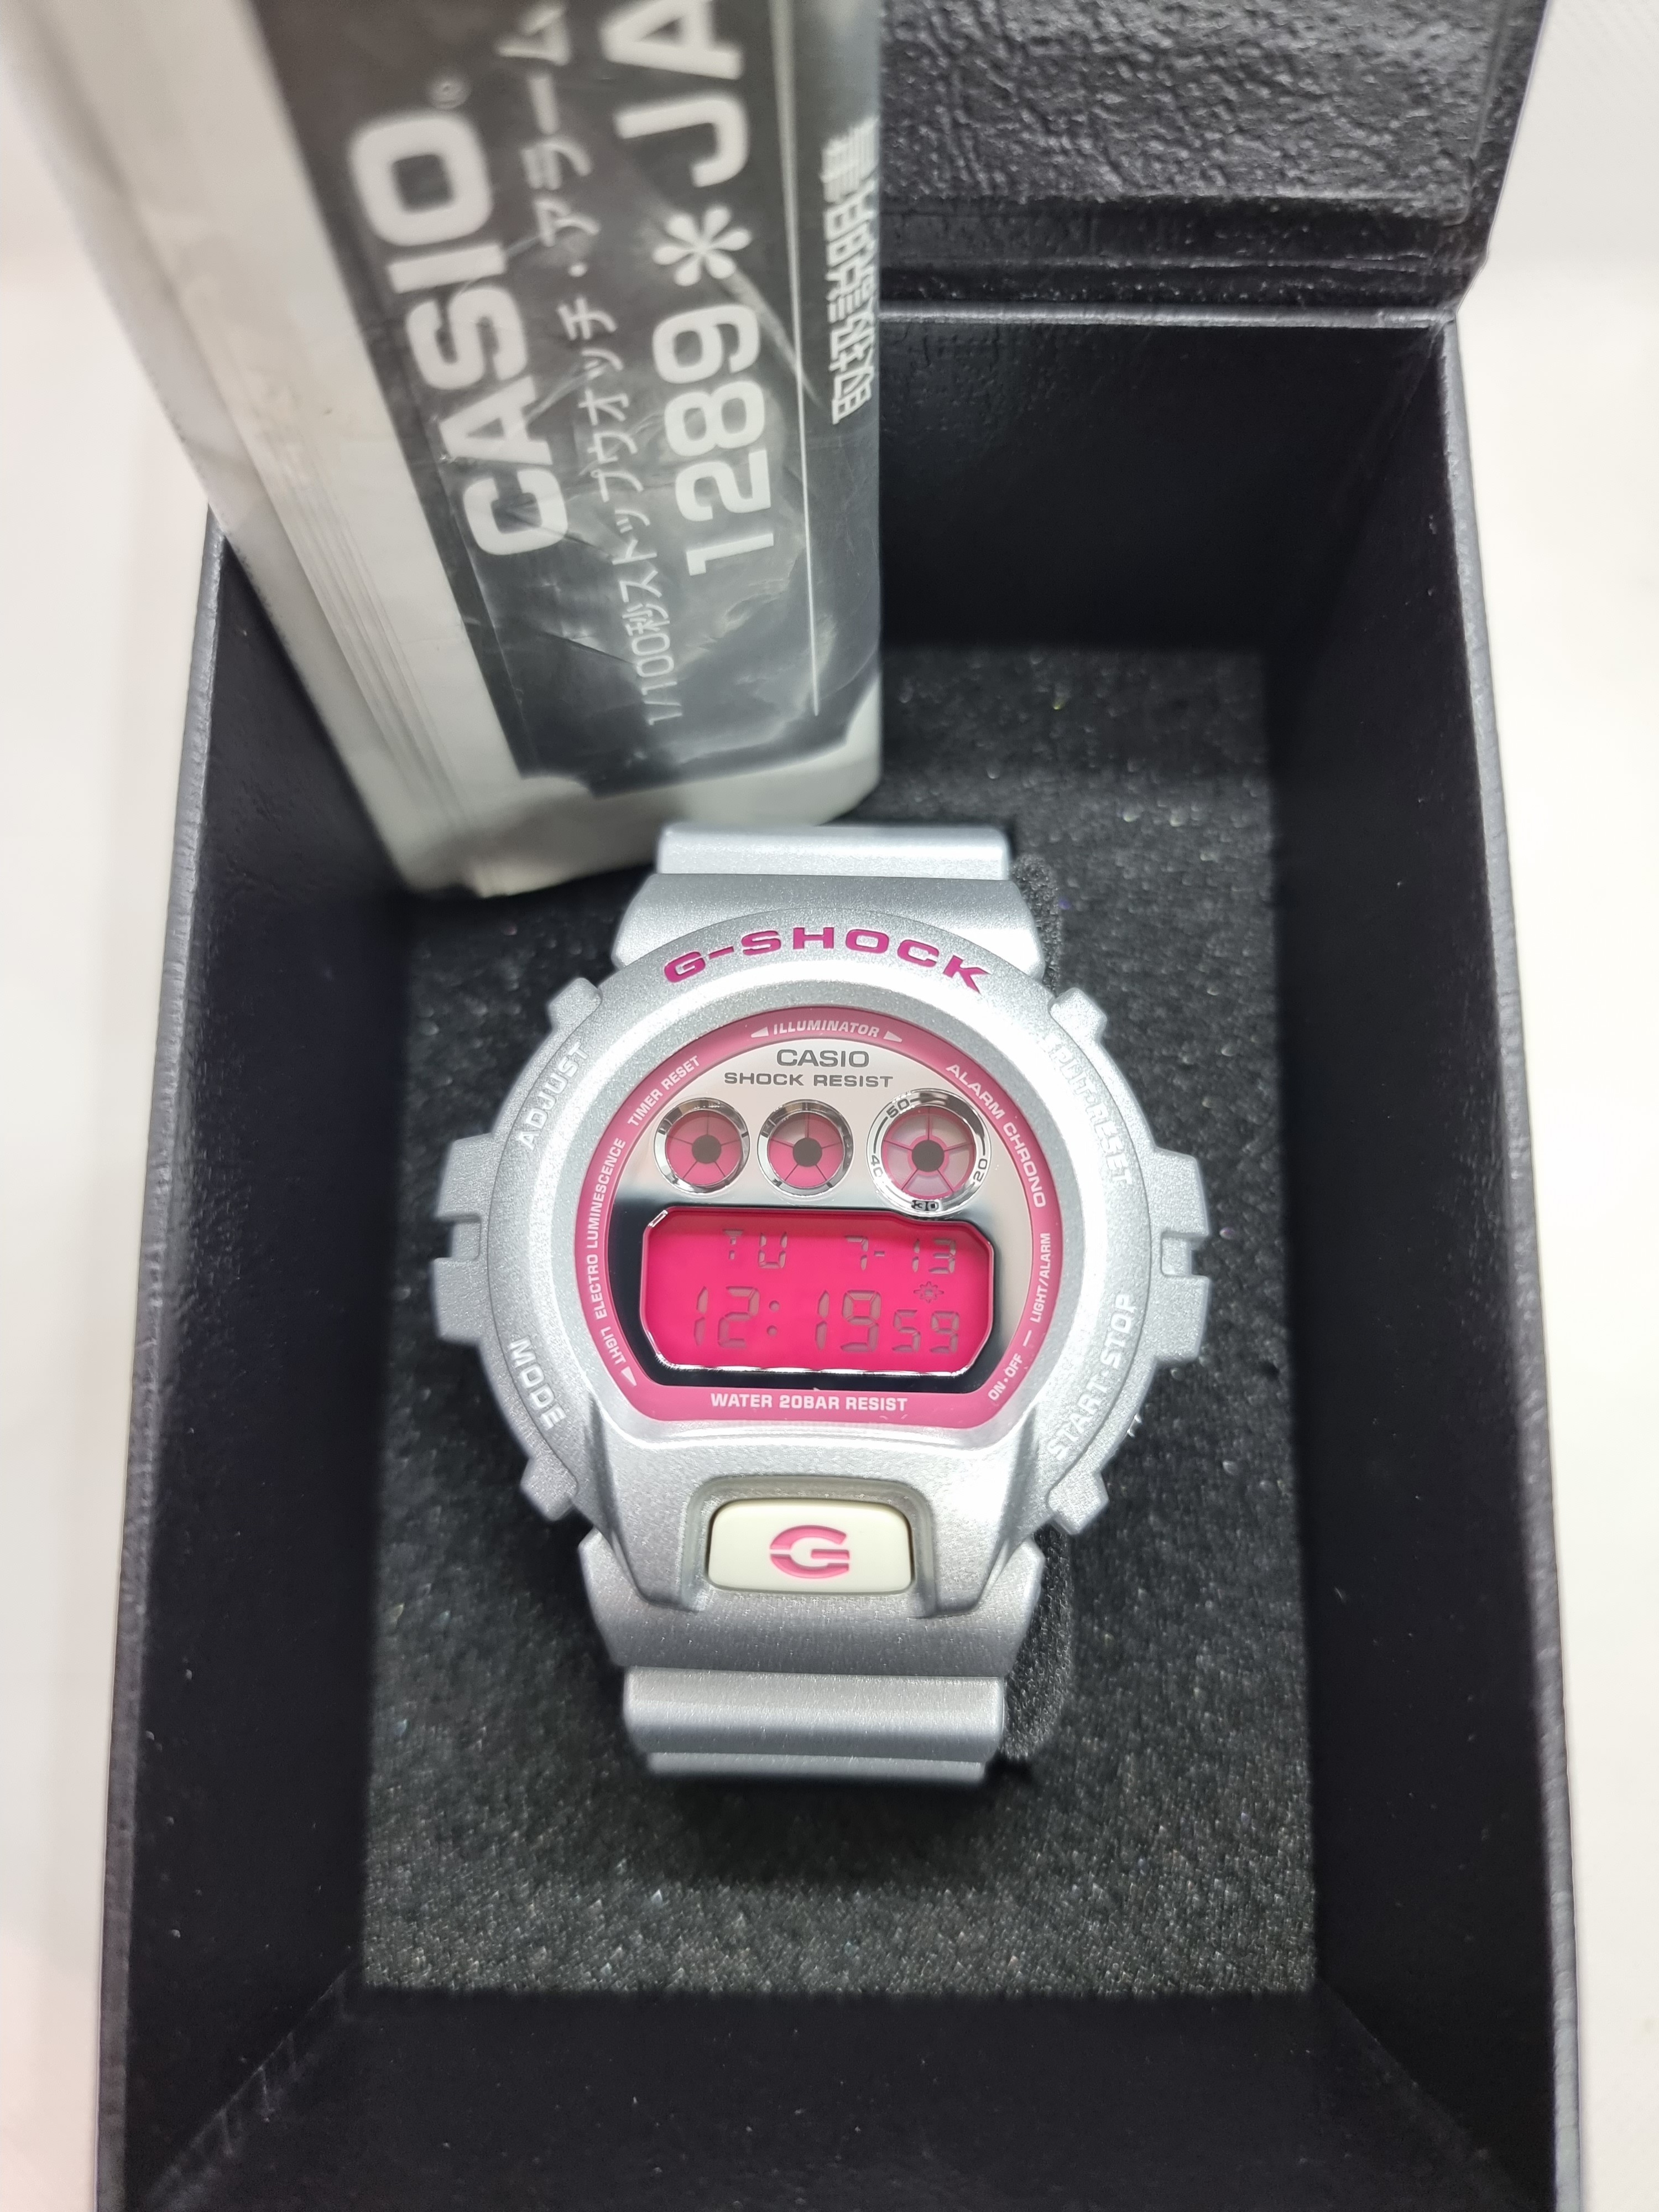 BRAND NEW ???? ???? Authentic ⚠️ CASIO G-SHOCK GSHOCK x DW-6900CB-8  MODULE 1289 (???? BRAND NEW VERY RARE HYPERCOLOUR NOS CB-8 COMPLETE  ???????? SET W/O TAG ????) THE ONLY ONE